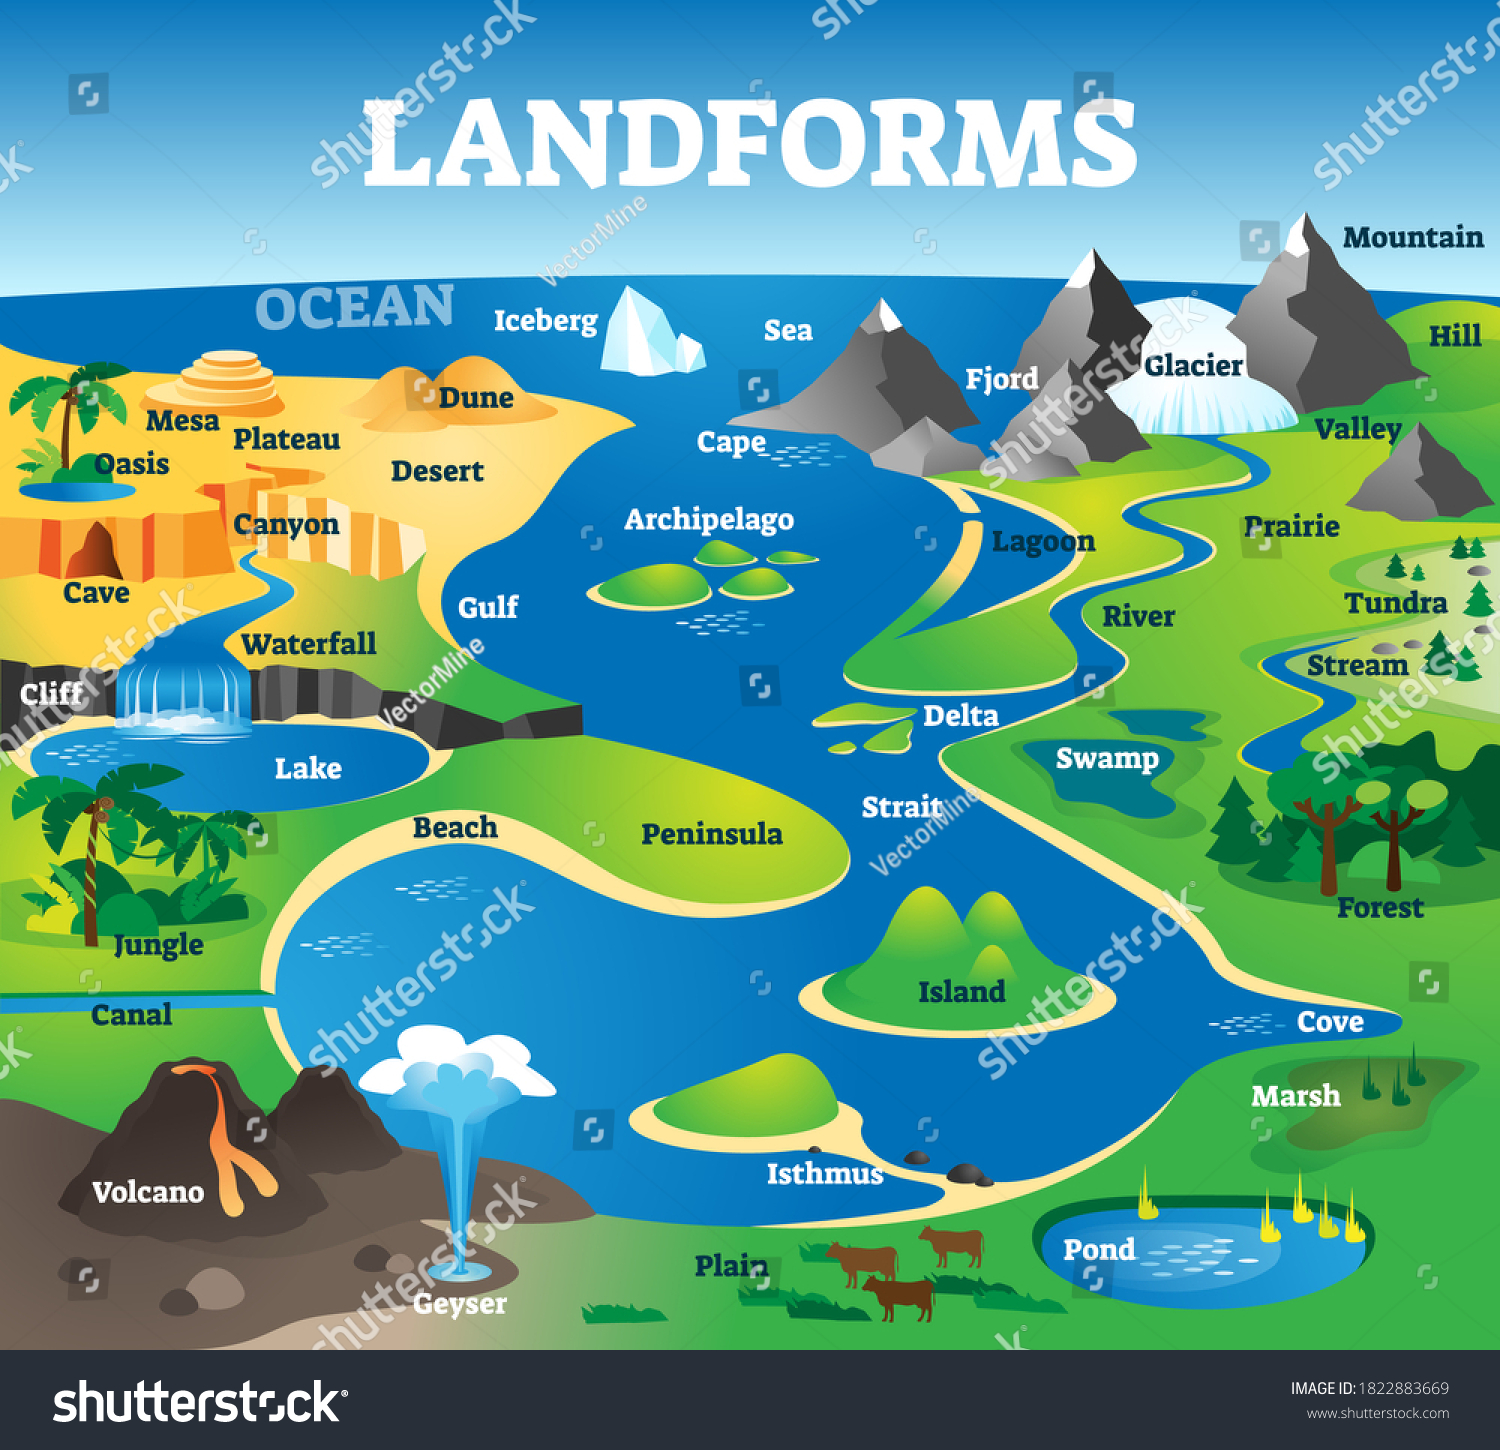 Stock Vector Landforms Collection With Educational Labeled Formation Examples Scenery Landscape View With 1822883669 